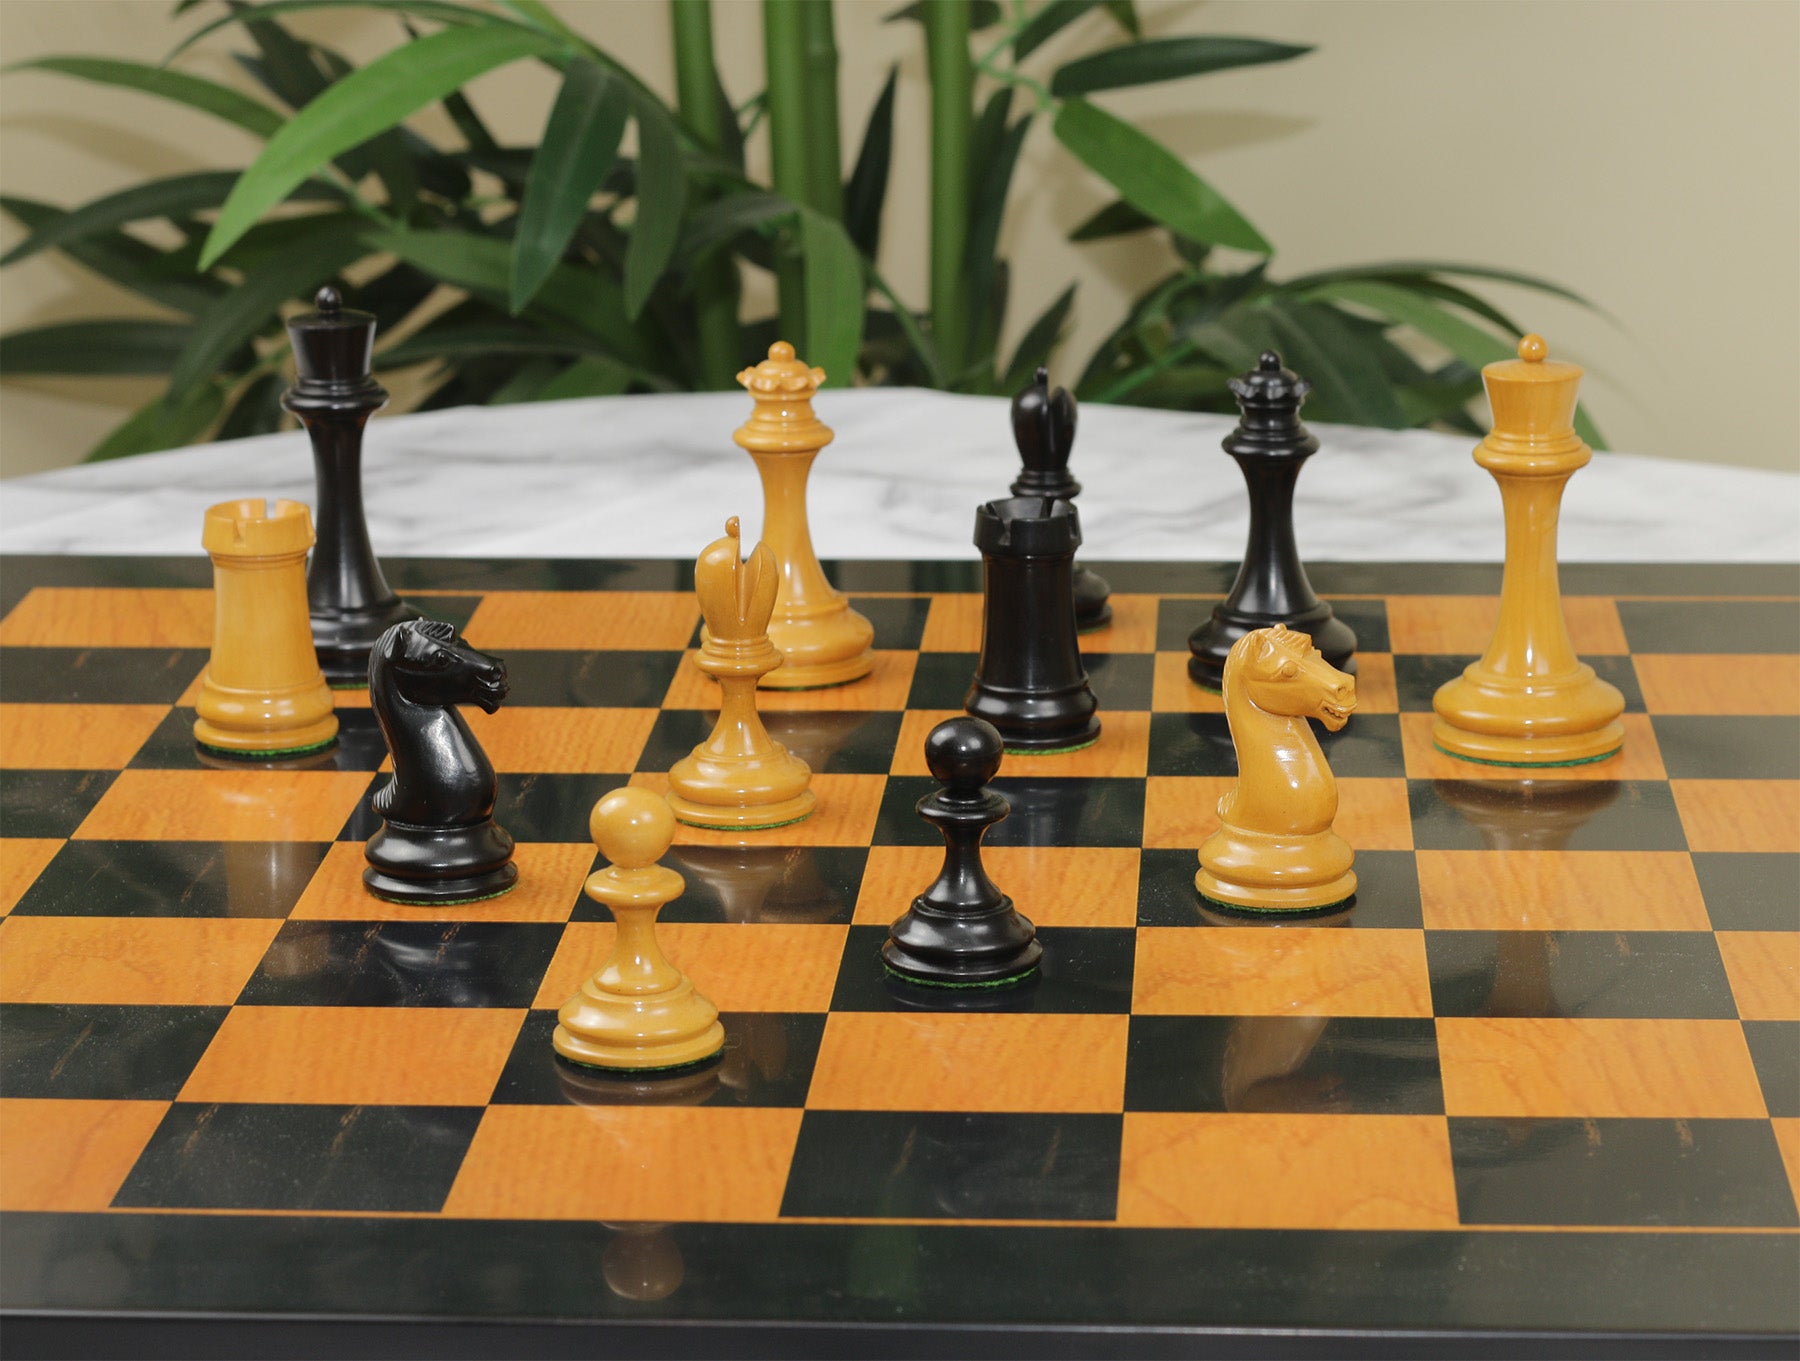 Reproduction Vintage B & Co 1860s Antique Chess Set in Ebony / Antiqued Box wood - 4" King